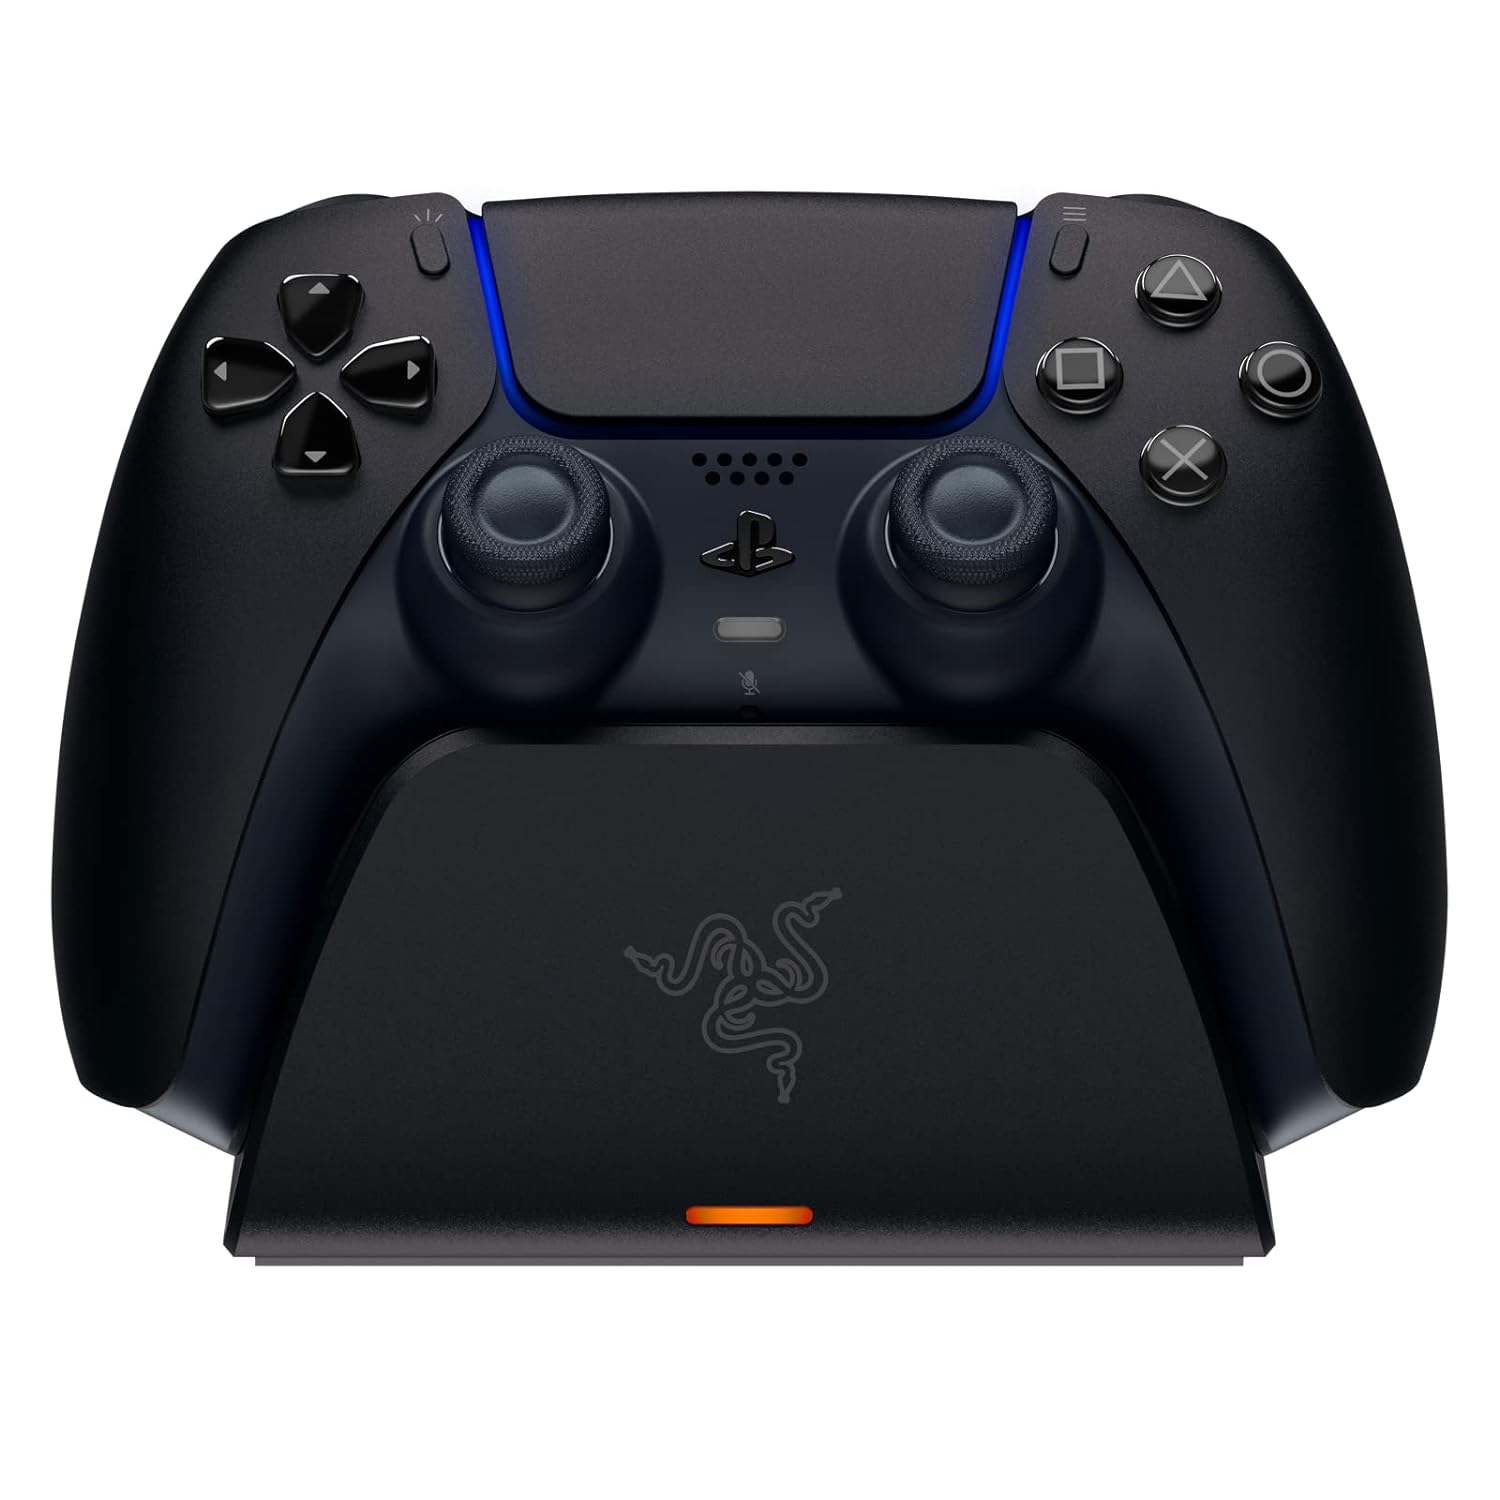 Razer Quick Charging Stand for PlayStation 5: Quick Charge - Curved Cradle Design - Matches PS5 DualSense Wireless Controller - One-Handed Navigation - USB Powered - Black (Controller Sold Separately)